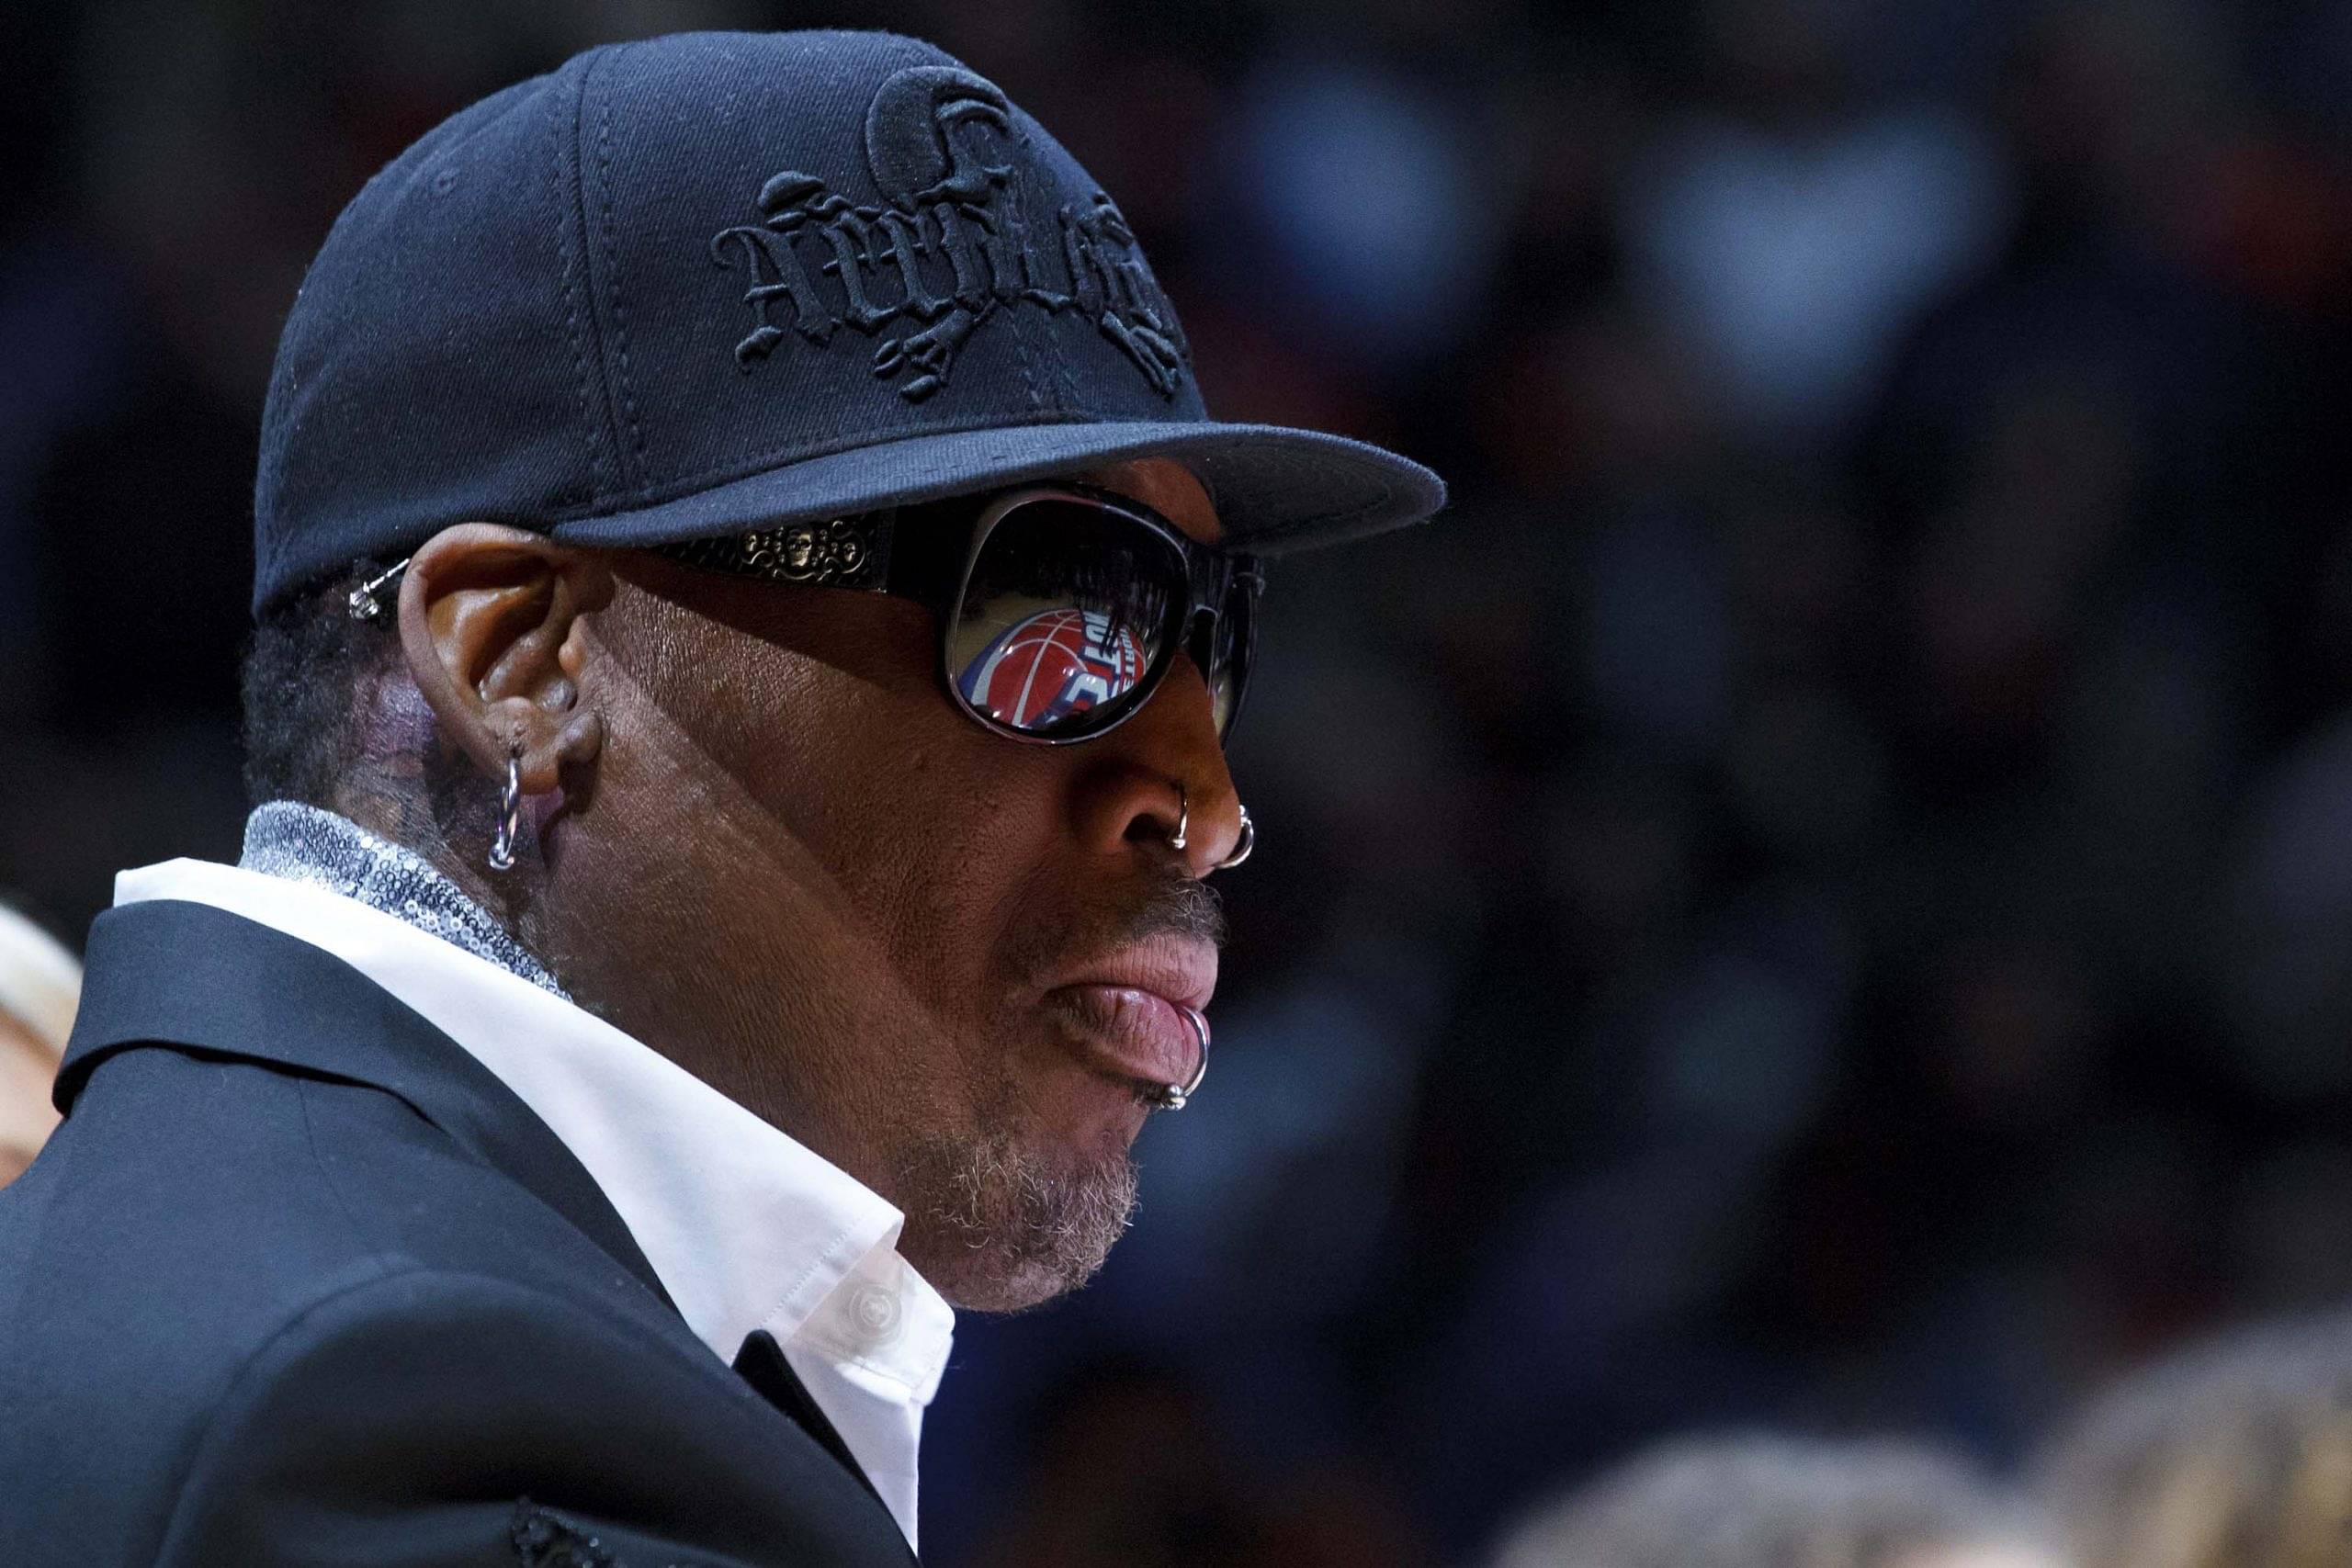 Showing Off' His $10,000 Wedding Gown, Dennis Rodman Uses His 'Do Anything  I Wanna Do' Mentality To Promote His Brand - The SportsRush